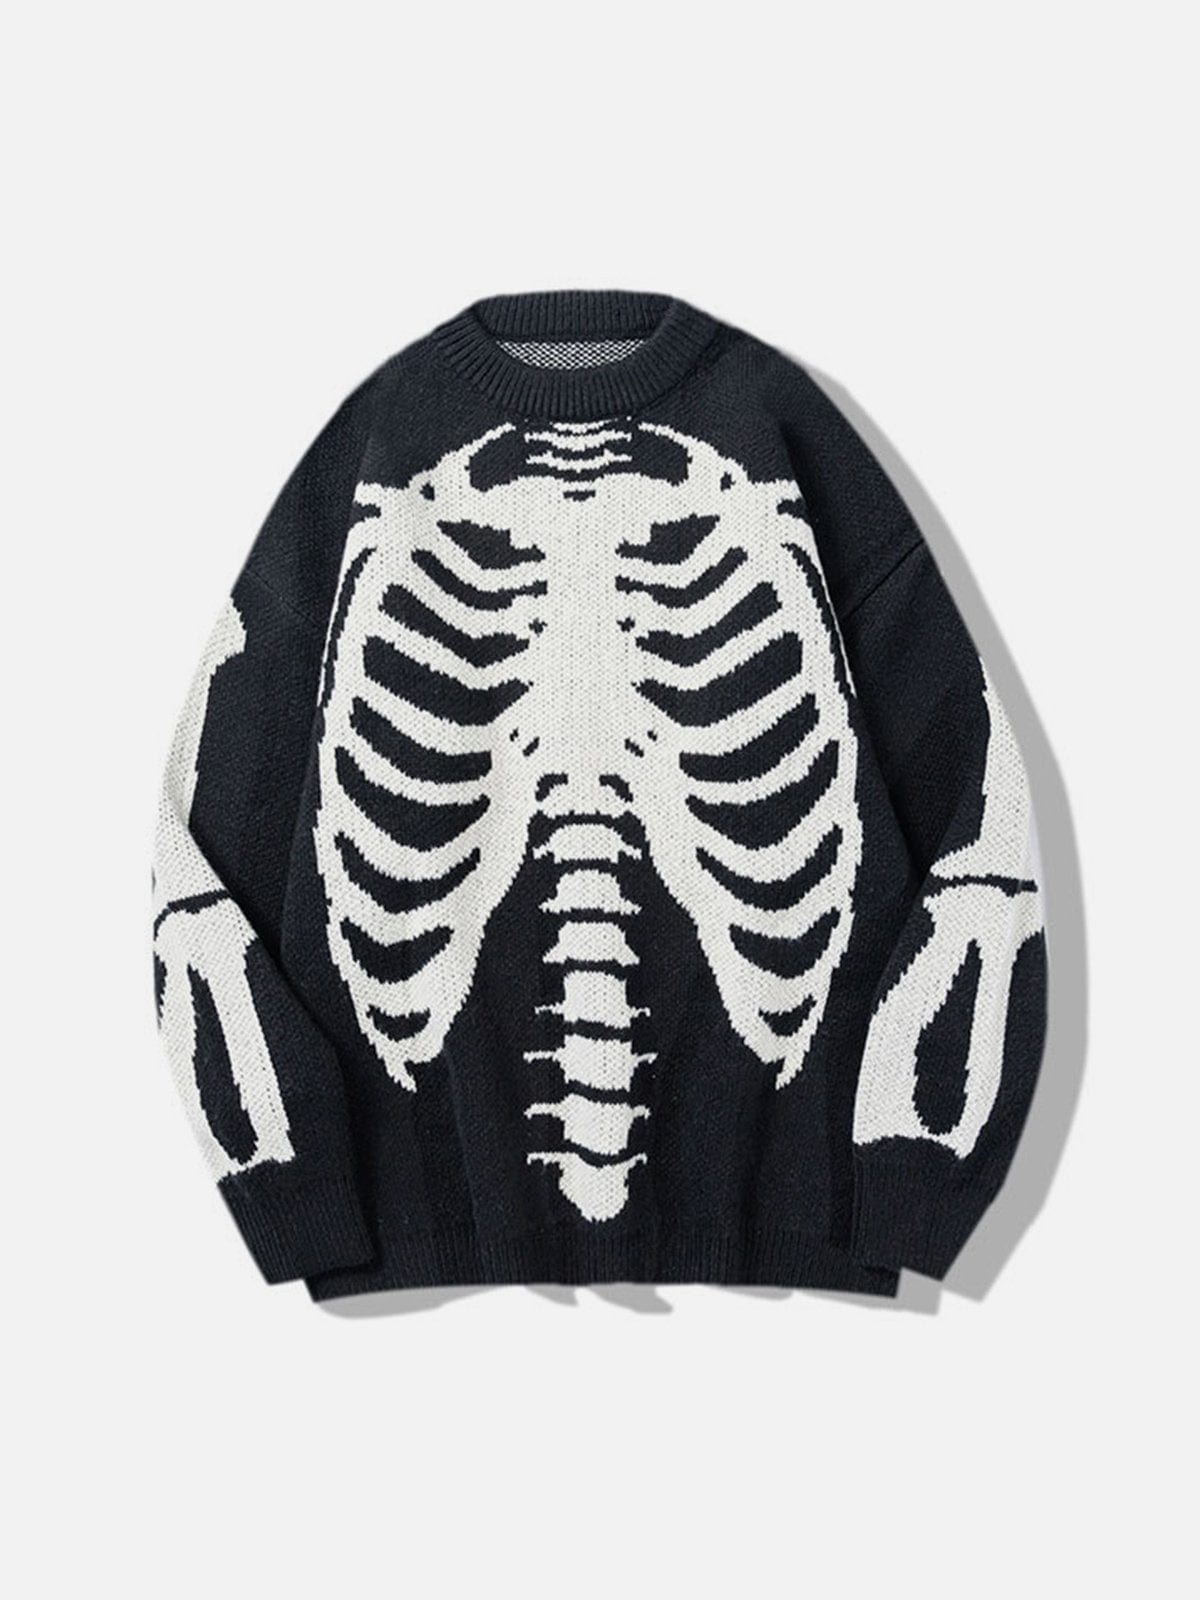 Skeleton Graphic Knit Sweater